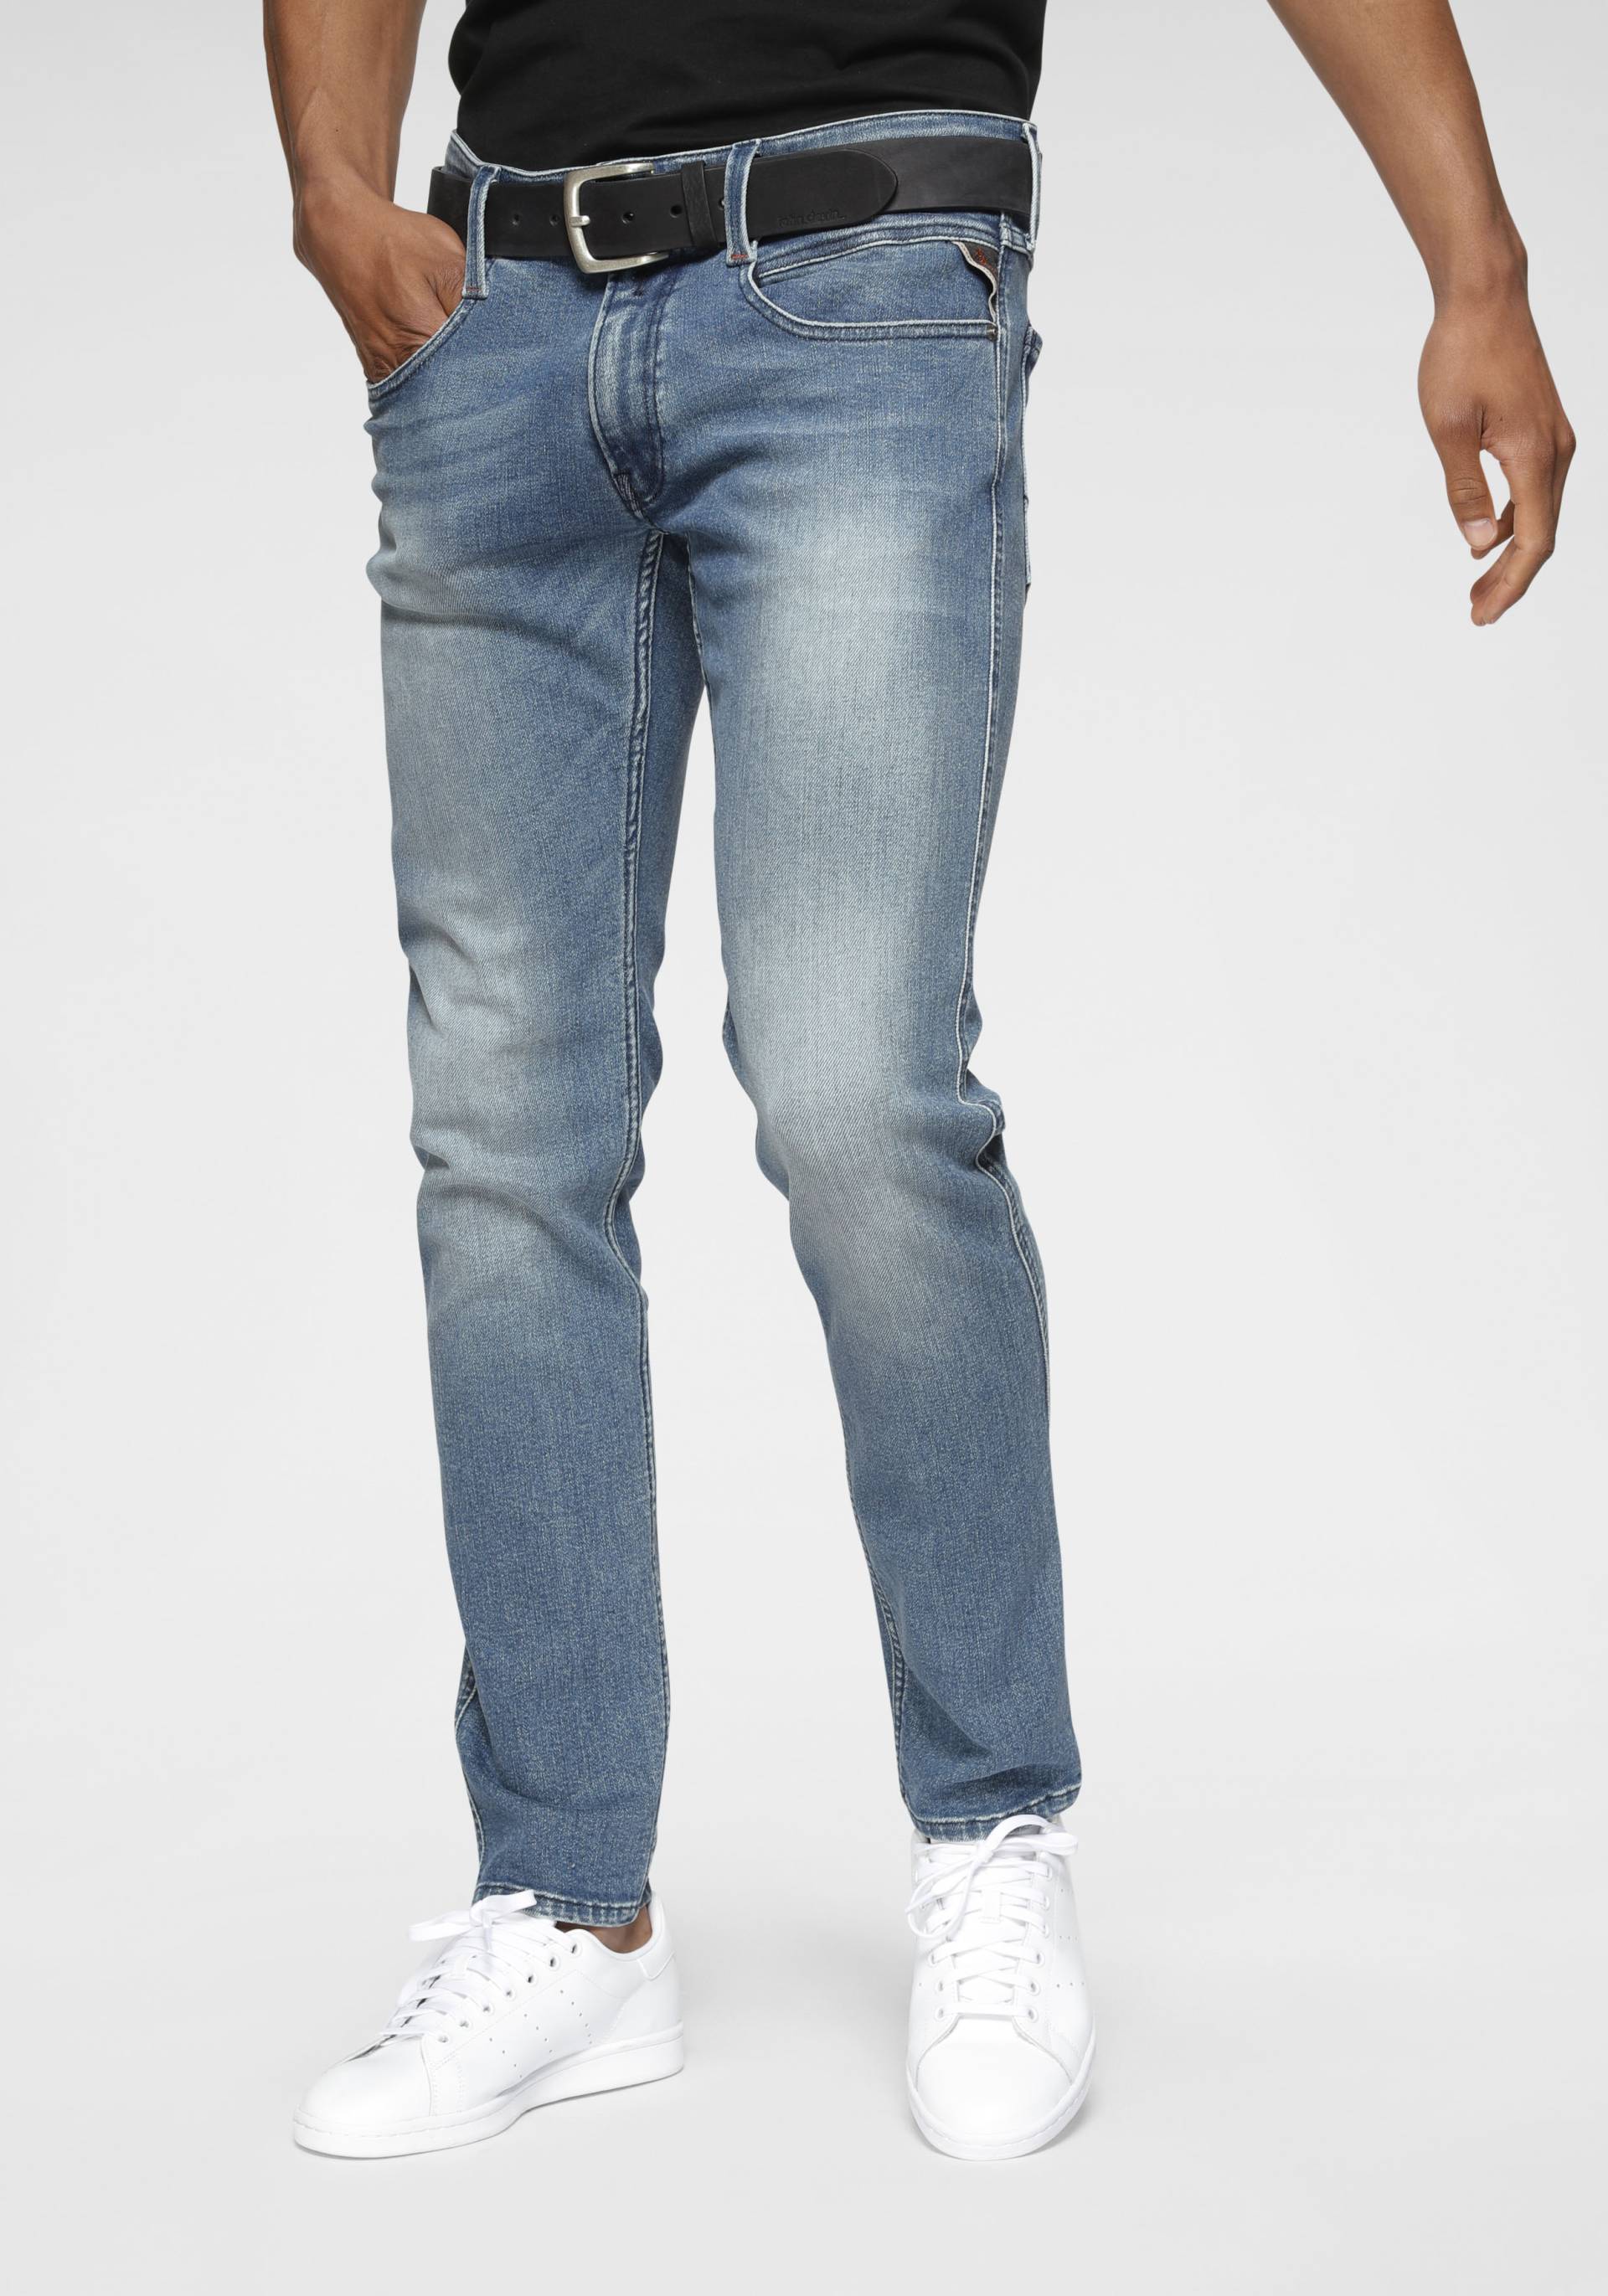 Replay Slim-fit-Jeans »Anbass Superstretch« von Replay